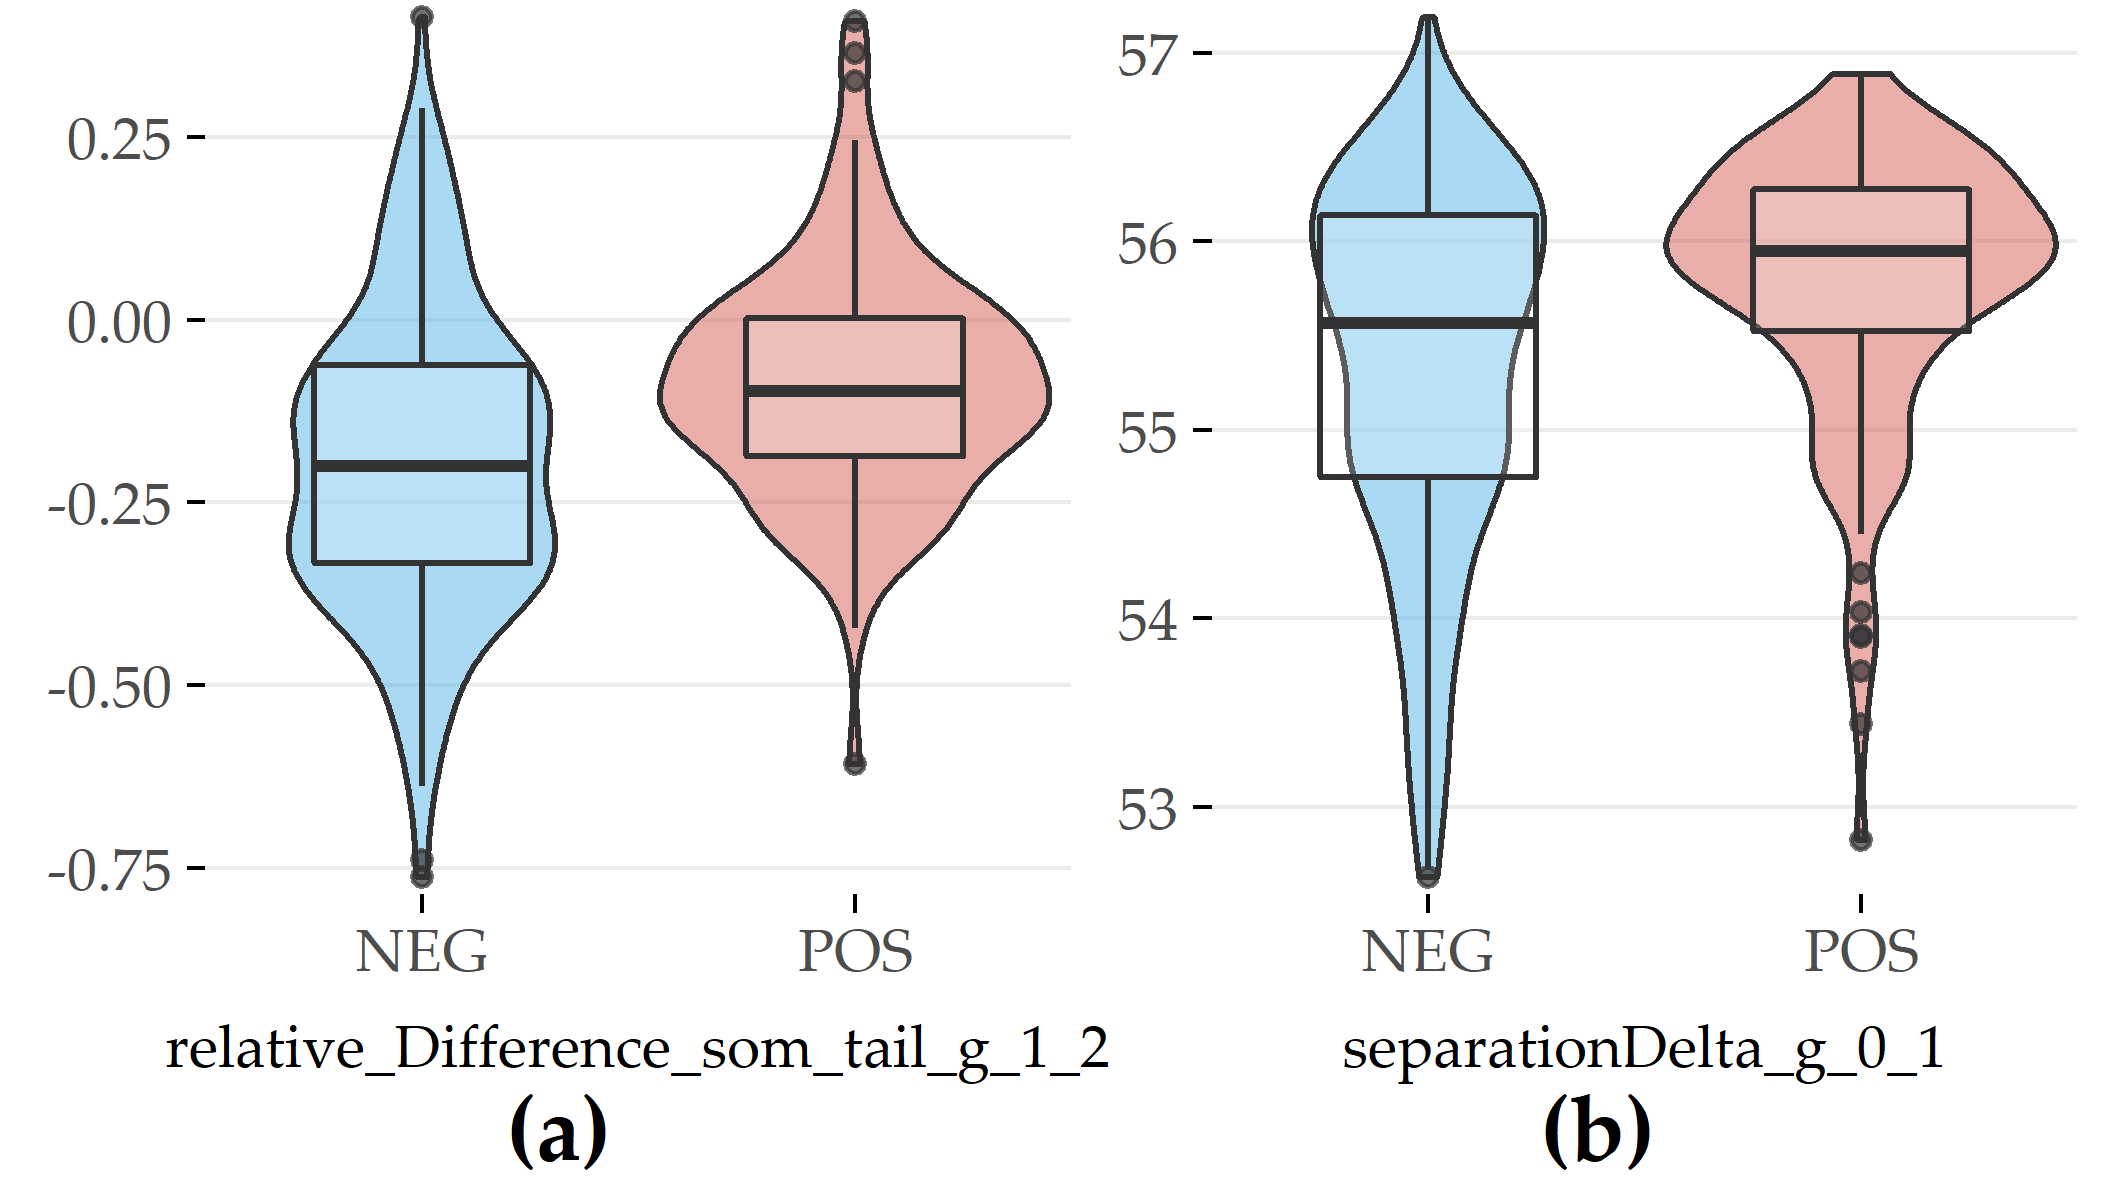 Selected evolution features with the highest contribution to class separation for PartitionM. (a) Relative difference in waist circumference between SHIP-1 and SHIP-2. (b) Difference in cluster separation between SHIP-0 and SHIP-1.